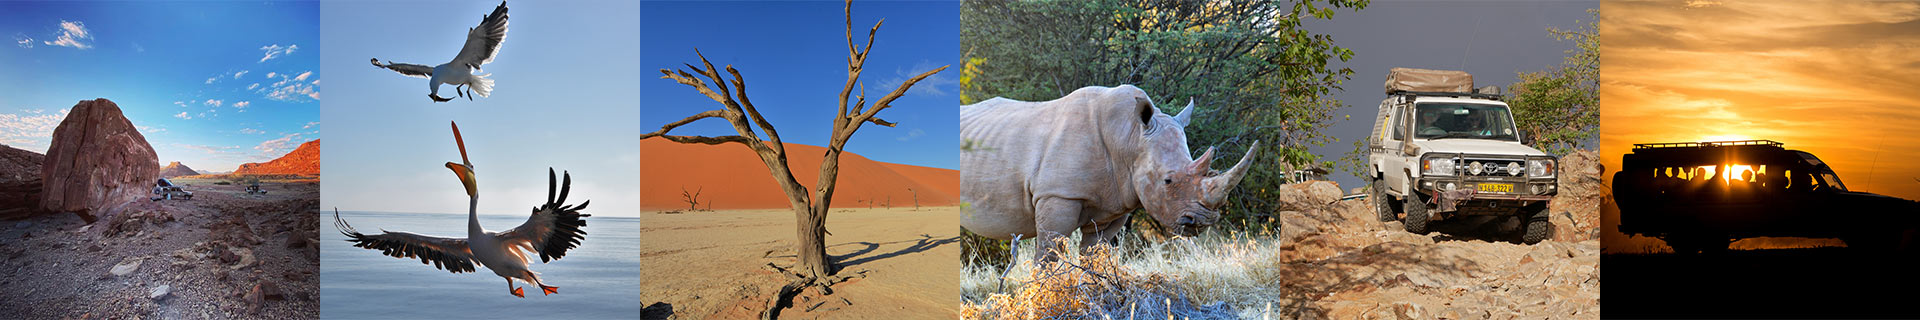 Namibia-Private-Guided-Safari-Tours-Stretched-Landcruiser-footer